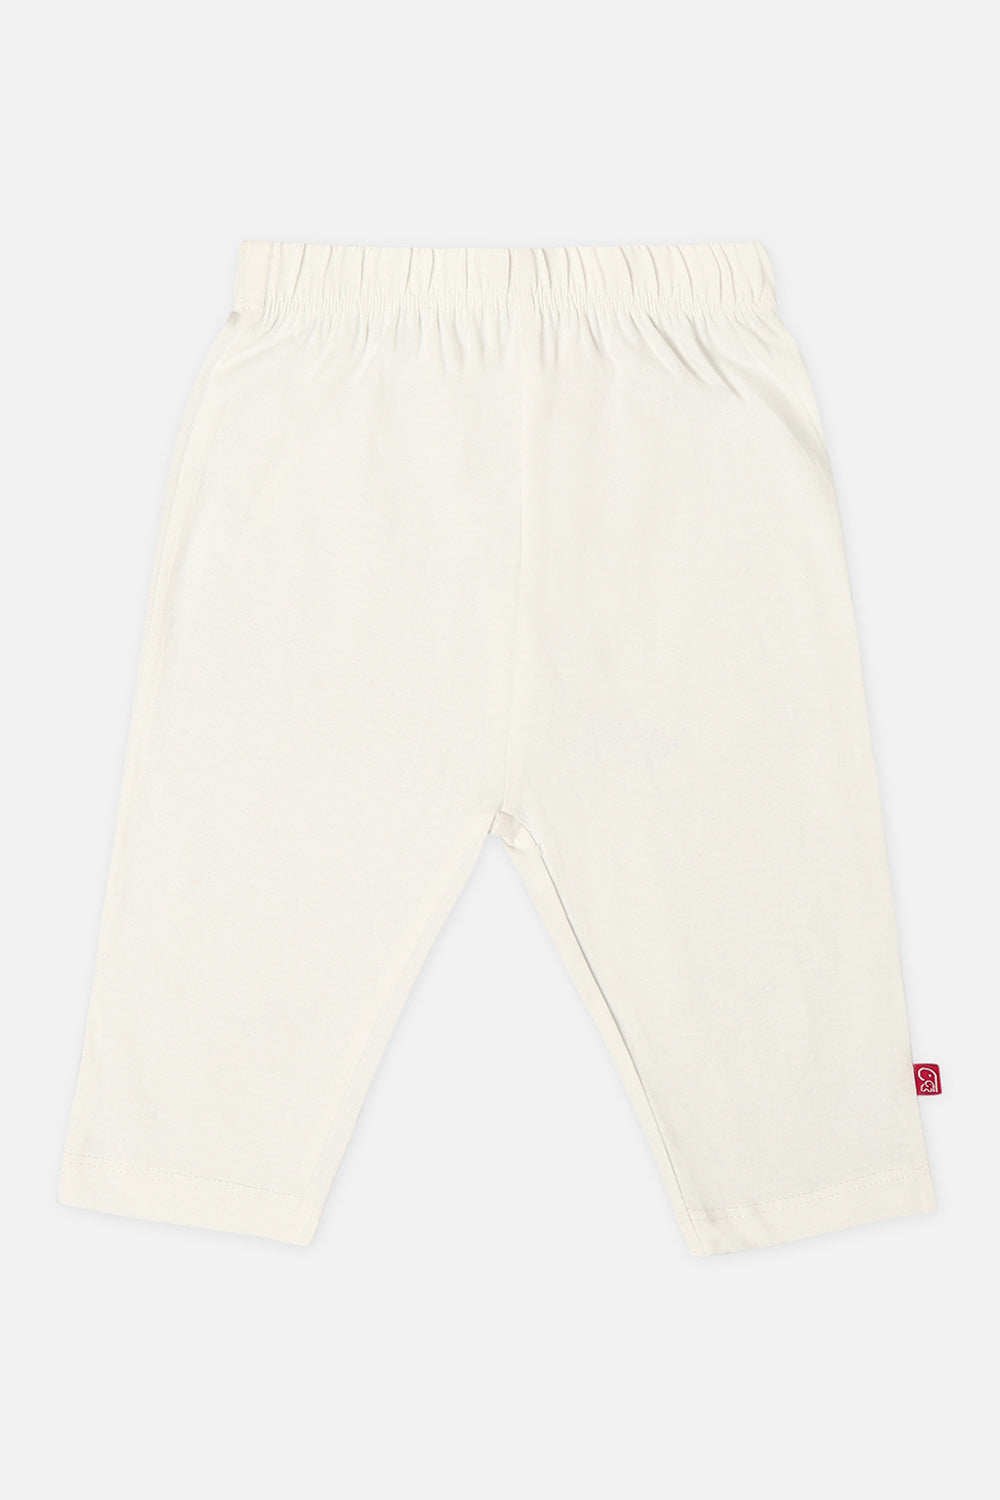 Oh Baby Comfy Pant White-Tr01